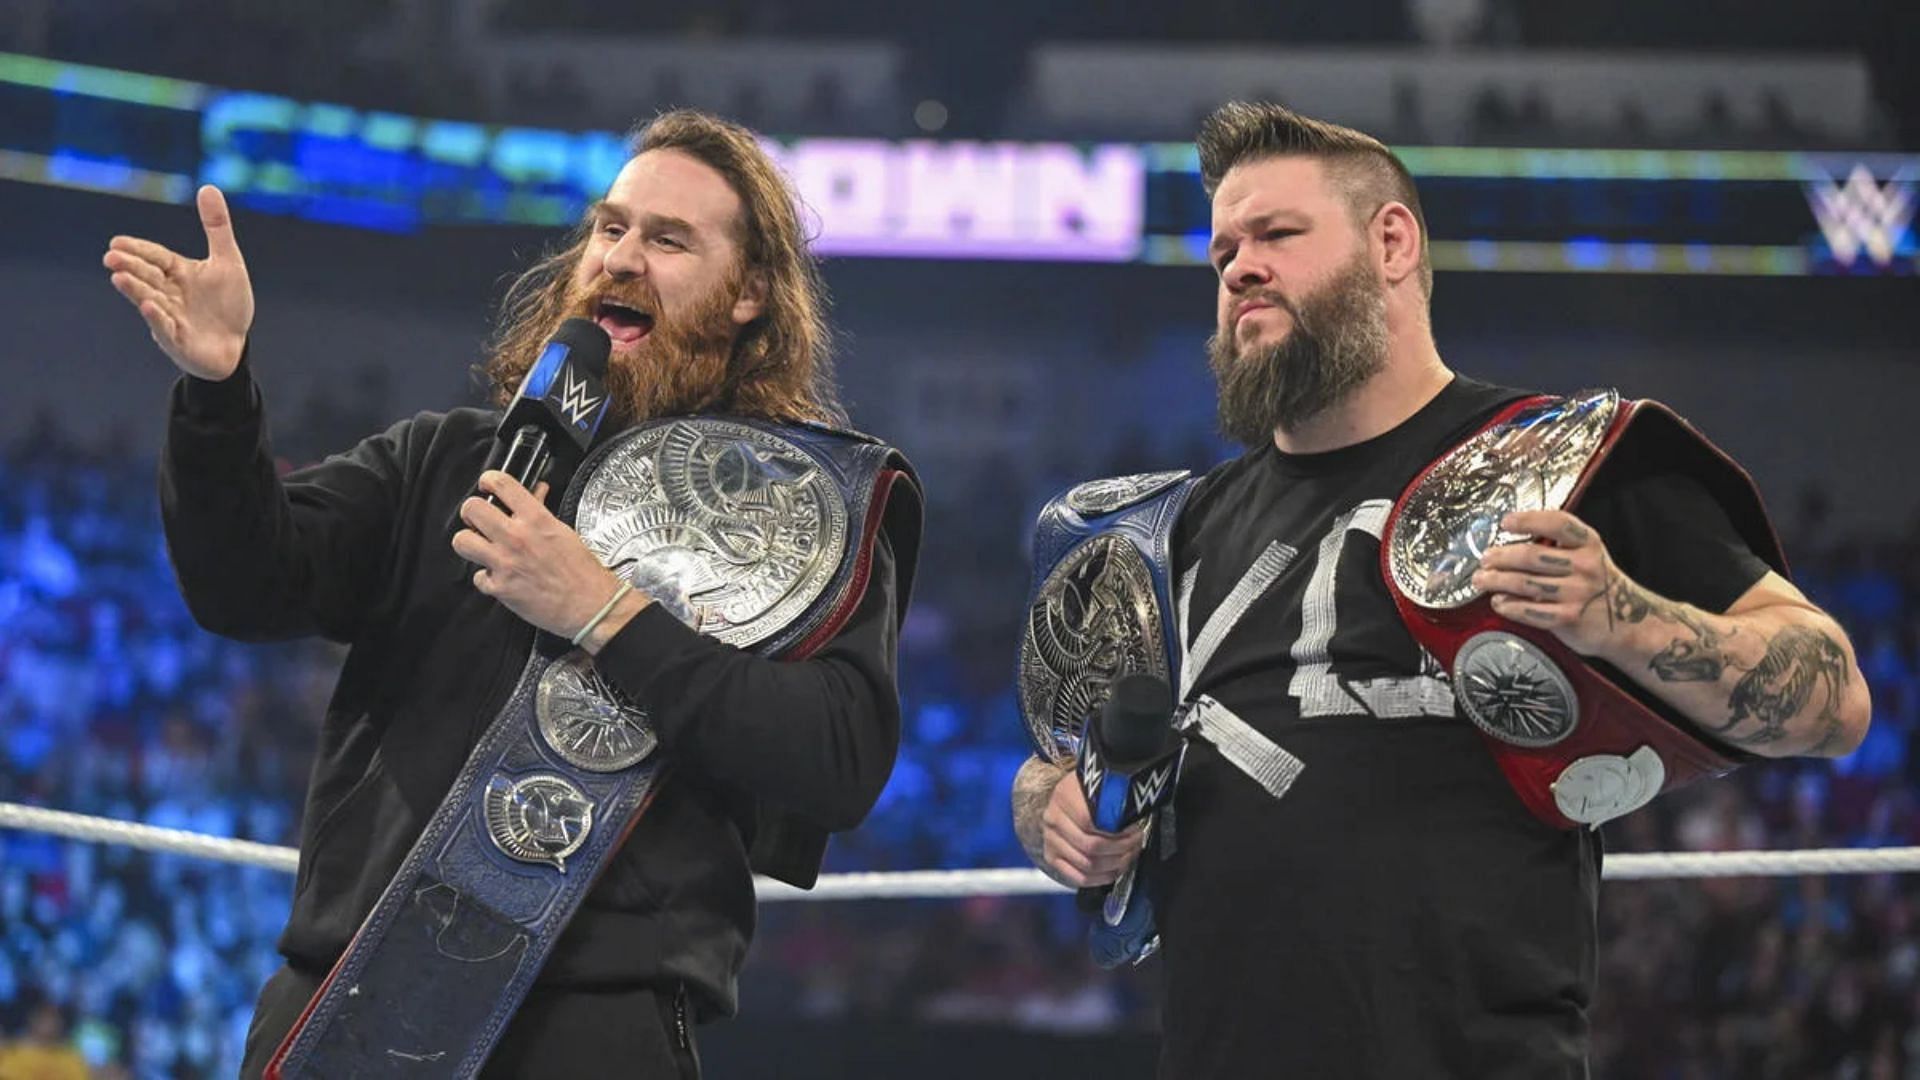 Current Undisputed WWE Tag Team Champions Kevin Owens and Sami Zayn